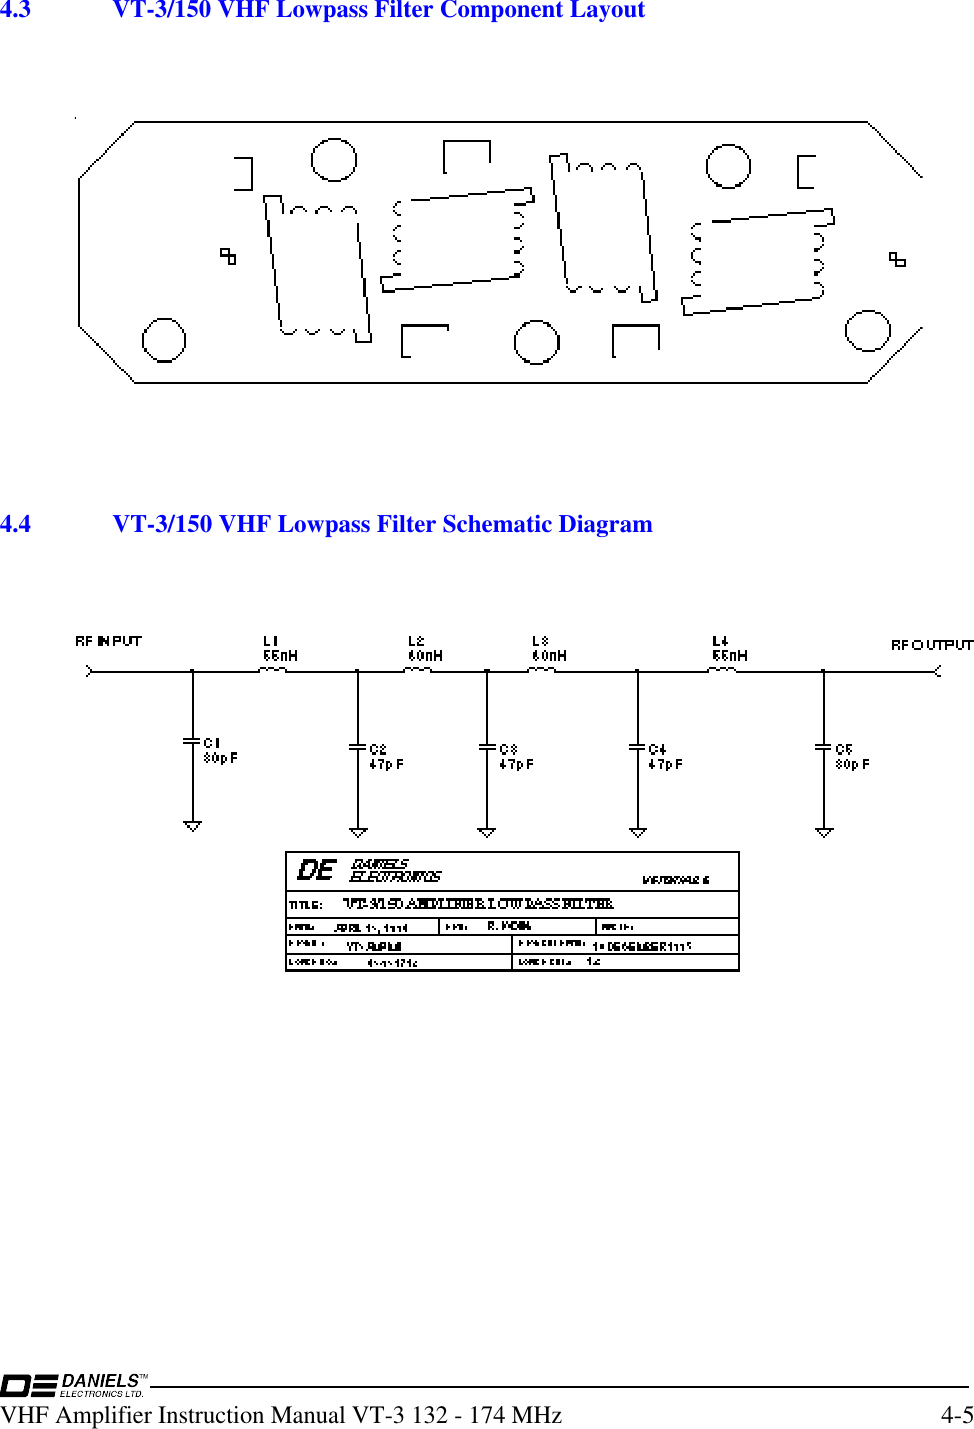 VHF Amplifier Instruction Manual VT-3 132 - 174 MHz4-54.3VT-3/150 VHF Lowpass Filter Component Layoutinvisible text4.4 VT-3/150 VHF Lowpass Filter Schematic Diagram